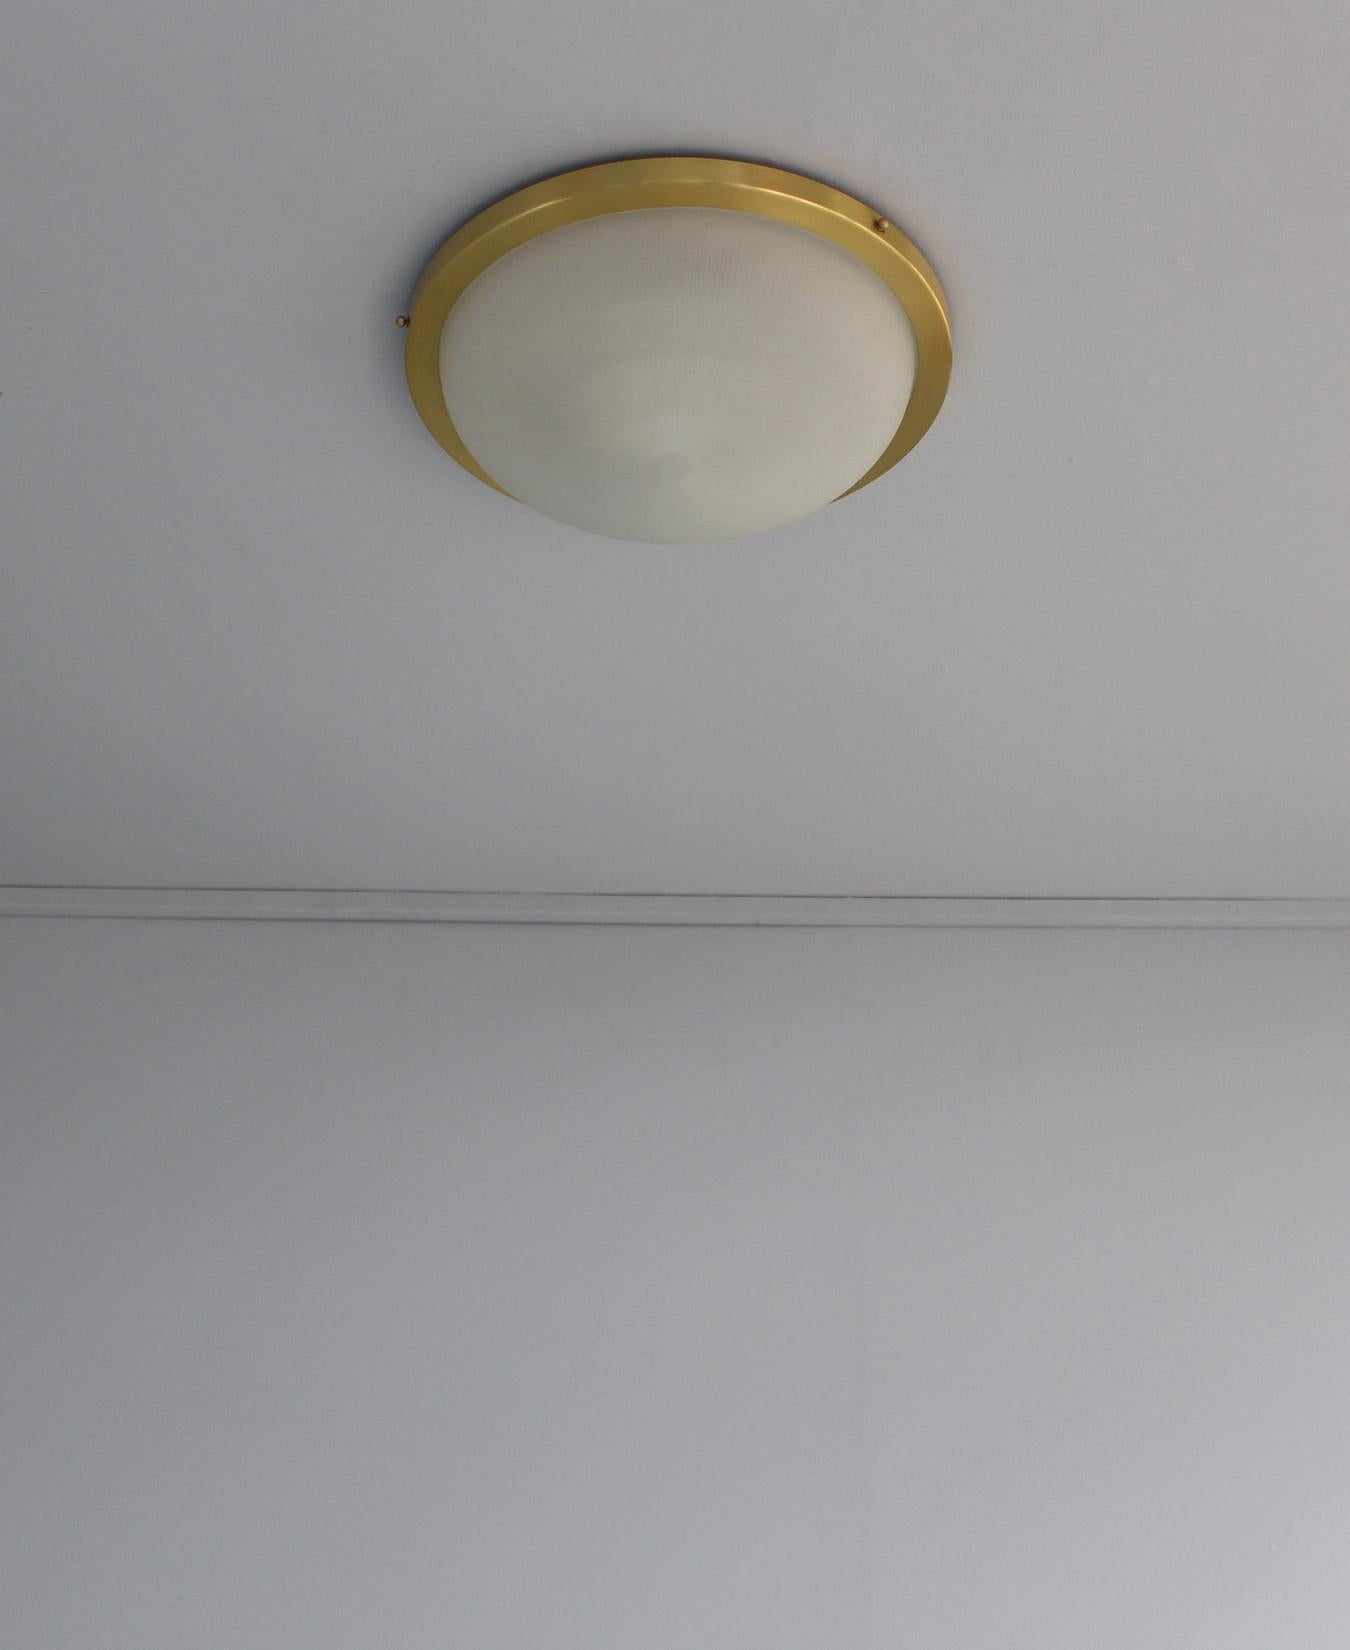 With a satin brushed circular brass structure that holds a fluted frosted glass bowl diffuser.
Signed.